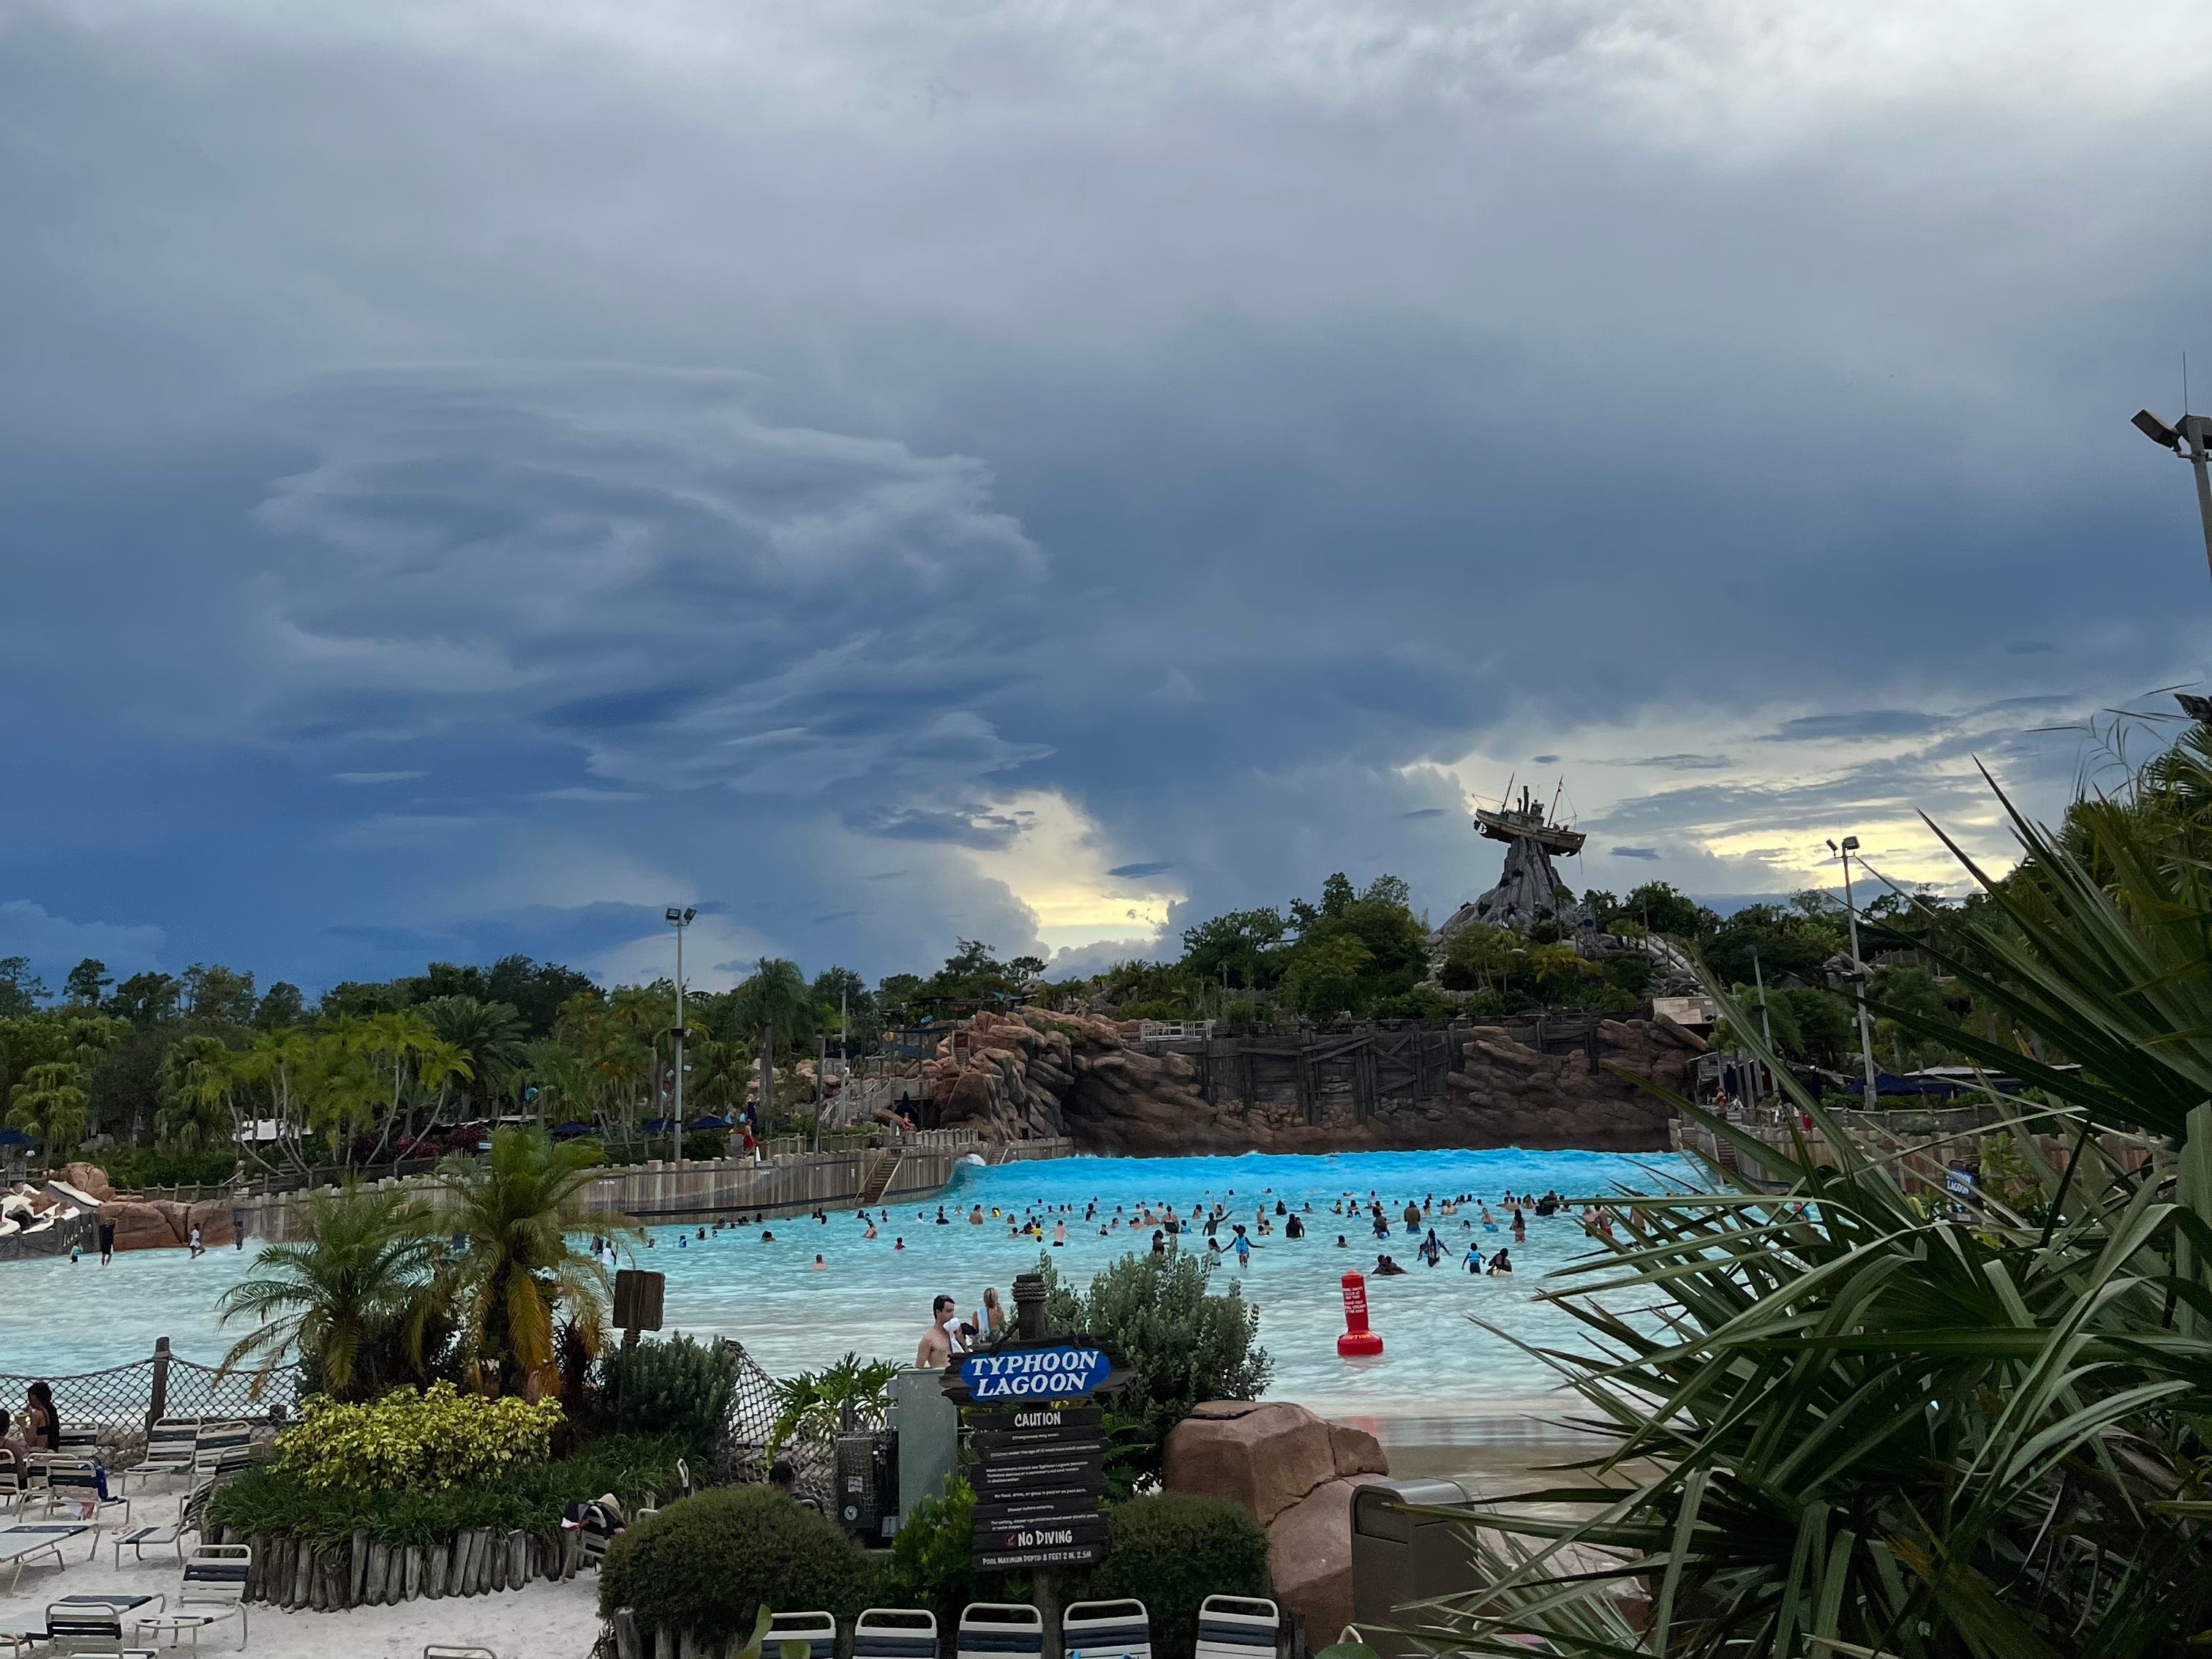 <p>One of my favorite things to do at Disney World is visit one of the two water parks, which alternate being open throughout the year. This summer, <a href="https://www.businessinsider.com/trying-cabana-at-typhoon-lagoon-disney-world-worth-it-2022">Typhoon Lagoon</a> is open.</p><p>As the days get longer in June and July, there are certain nights when the water park is open until 8 p.m.</p><p>I love getting to the park around 5 p.m. when most people are packing up and the heat of the day is starting to cool down. It's a great time to hit some <a href="https://www.businessinsider.com/worlds-largest-water-park-dubai-aquaventure-thrill-seekers-dream-2023-12">big water slides</a> and the lazy river for a few hours.</p><p>Additionally, Typhoon Lagoon hosts <a href="https://www.businessinsider.com/after-hours-disney-event-worth-price-h2o-glow-nights-review-2023-7">H2O Glow After Hours</a>, a separately ticketed event during which the park is open until 11 p.m. on select summer nights.</p><p>This is a great way to spend time in the park without the blazing sun making the water feel too hot.</p>